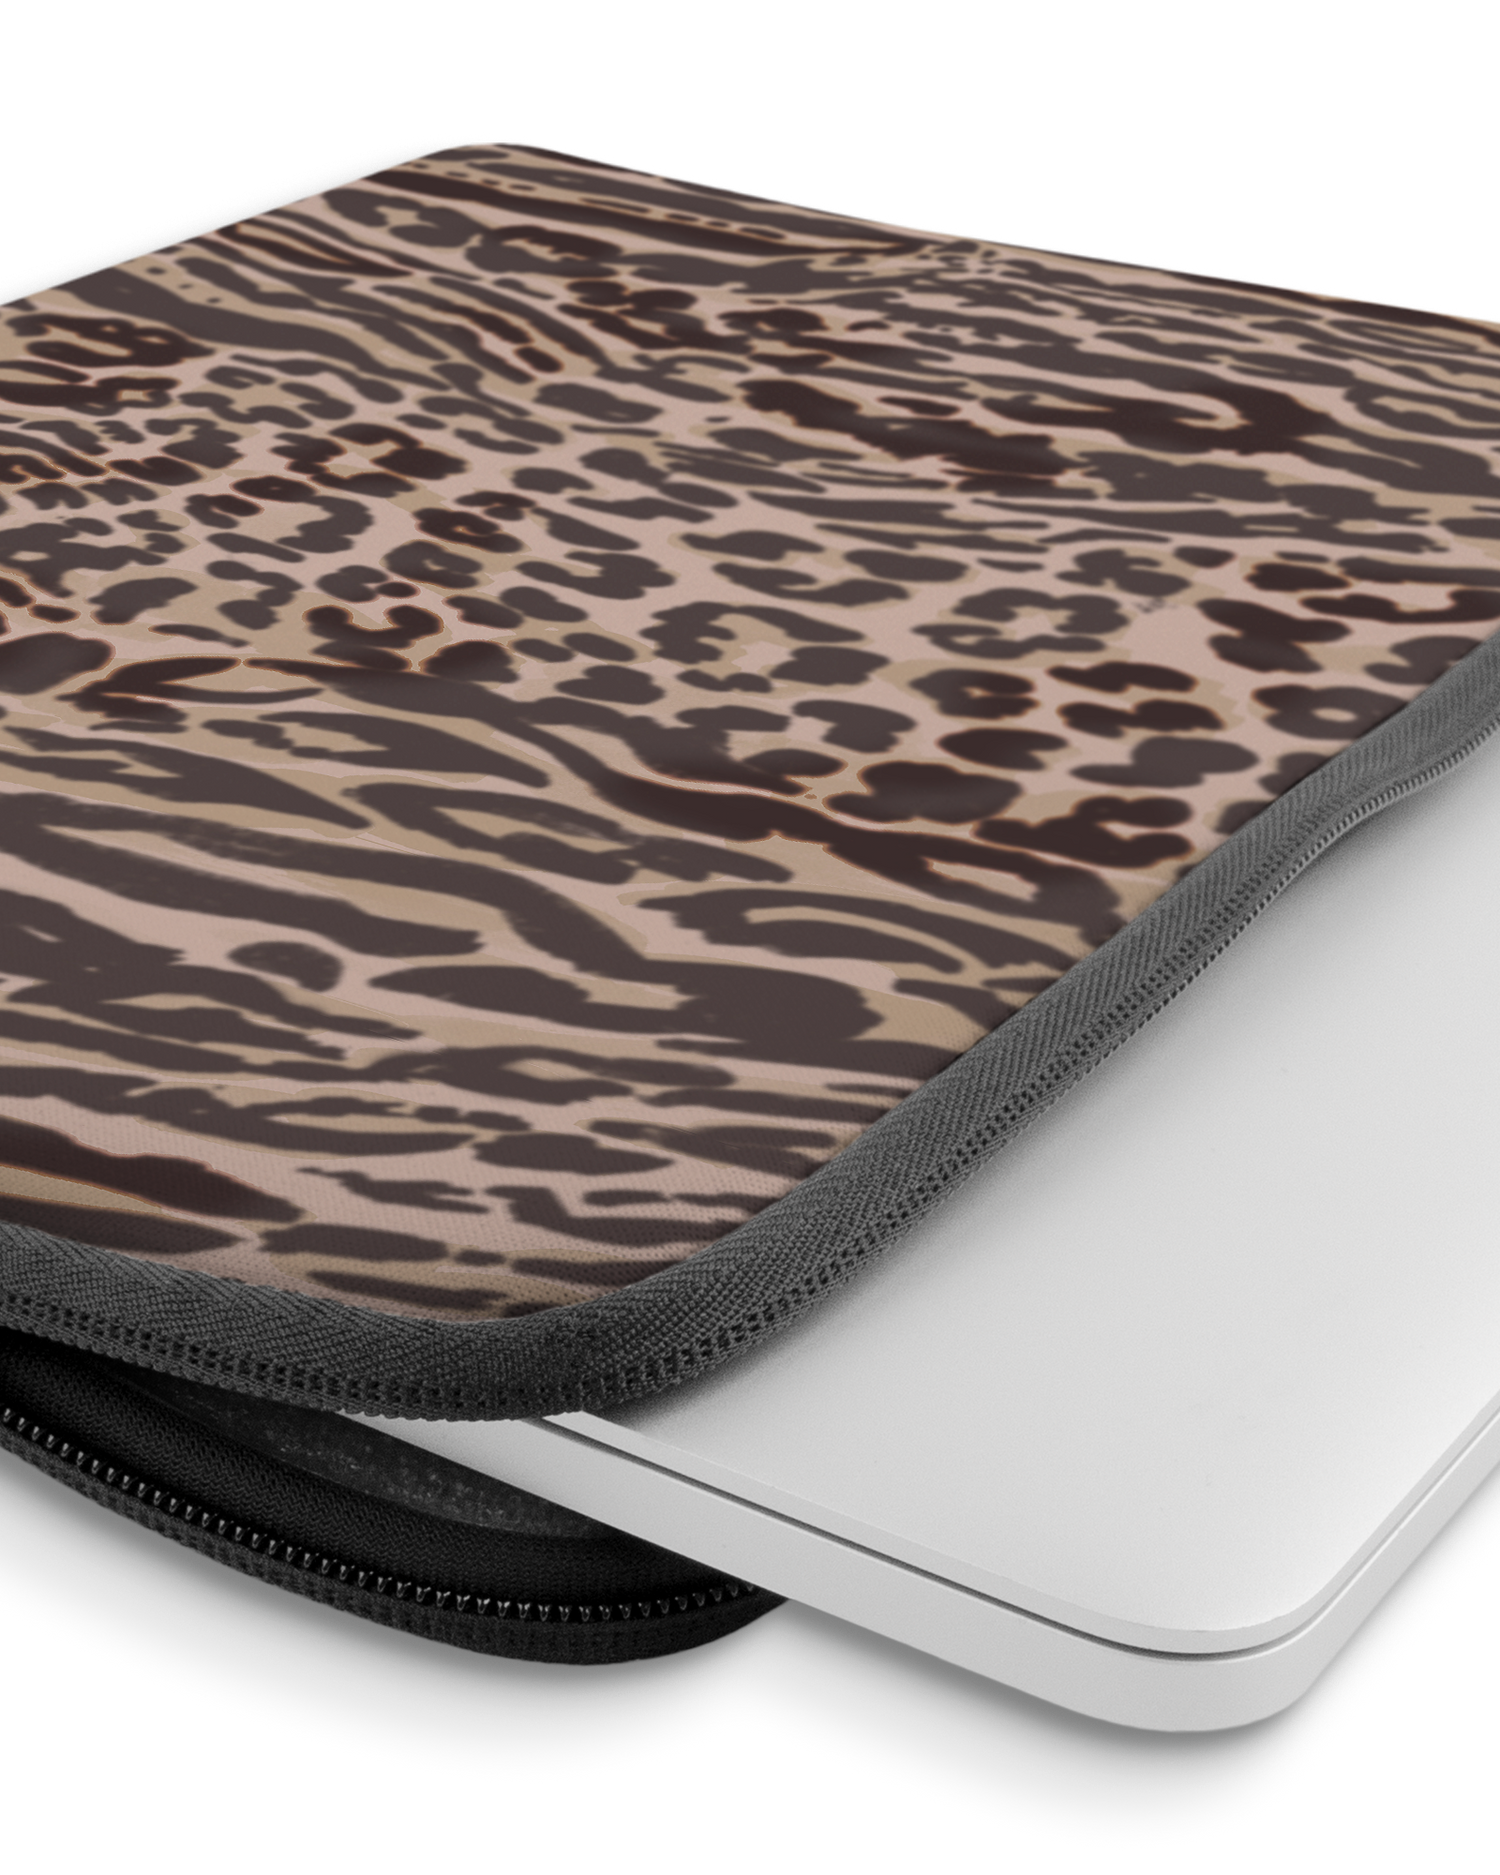 Animal Skin Tough Love Laptop Case 14 inch with device inside